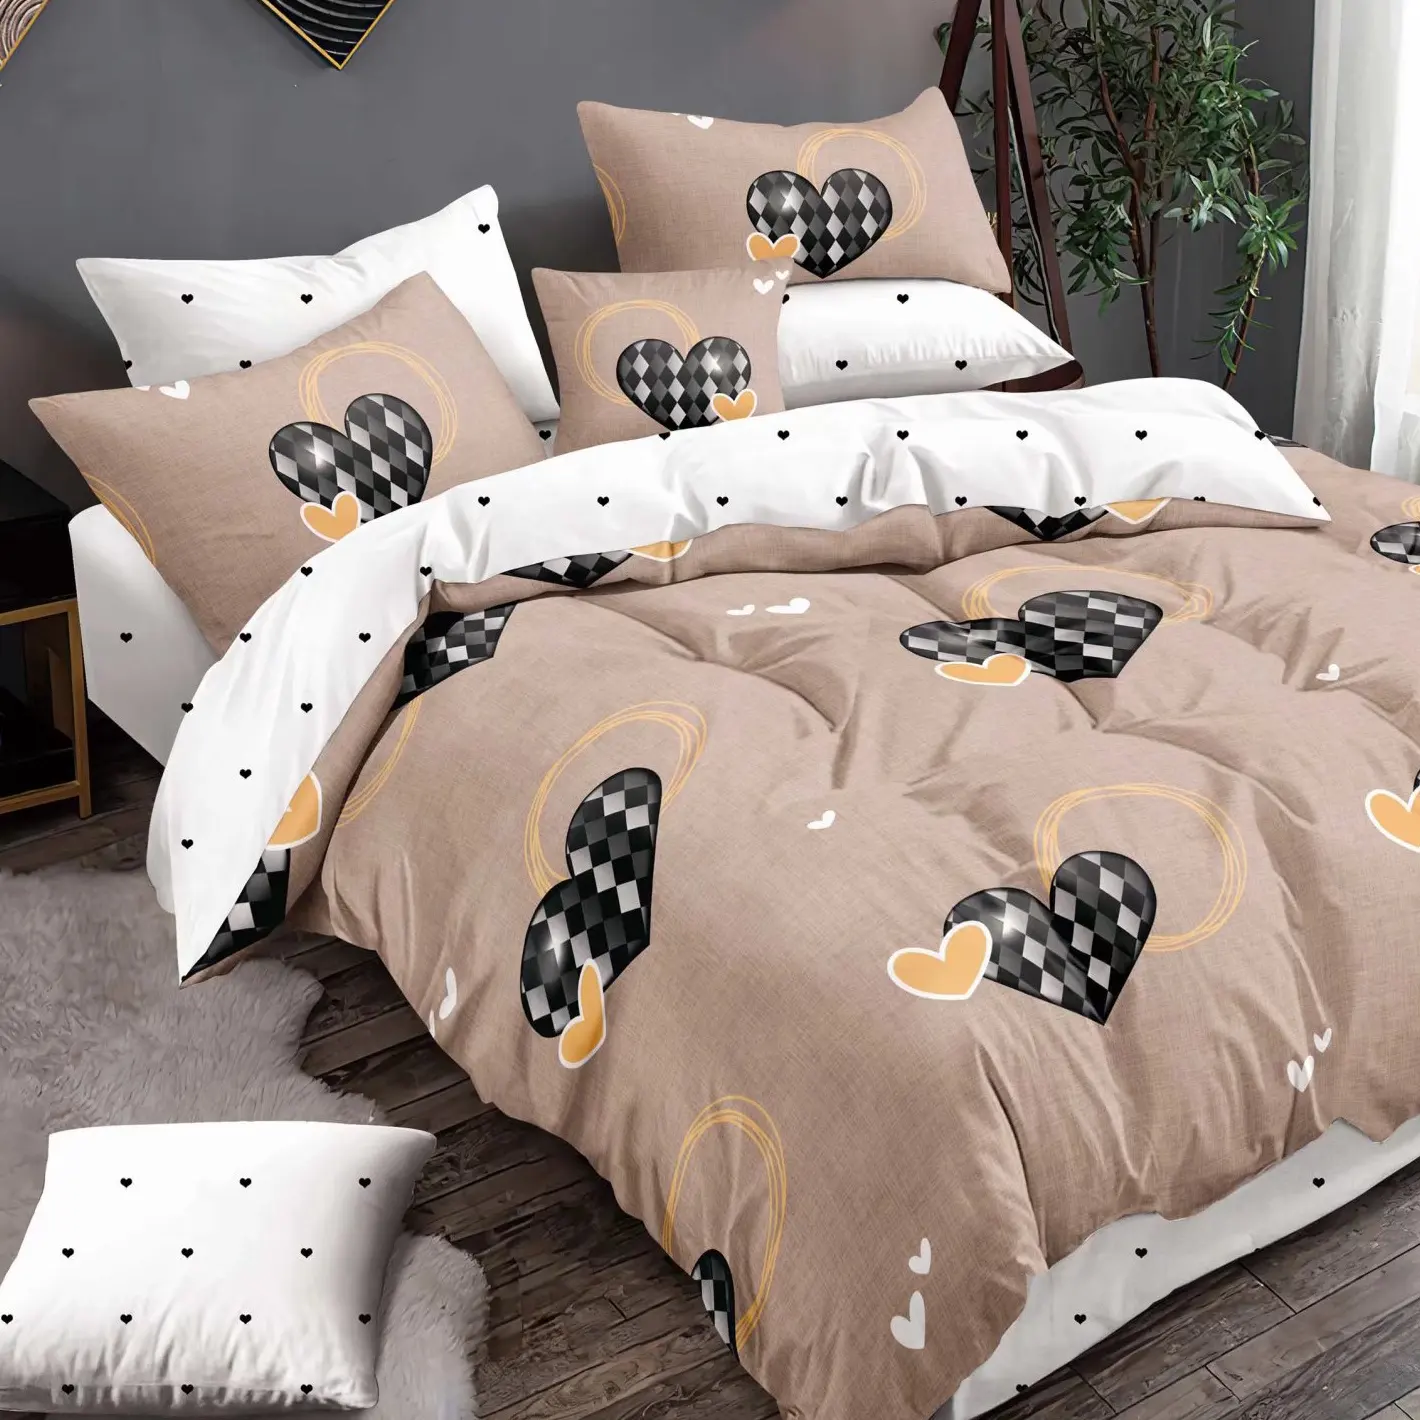 Factory direct cheap designers comforter sets bed sheet set bed cover set queen size king size full size